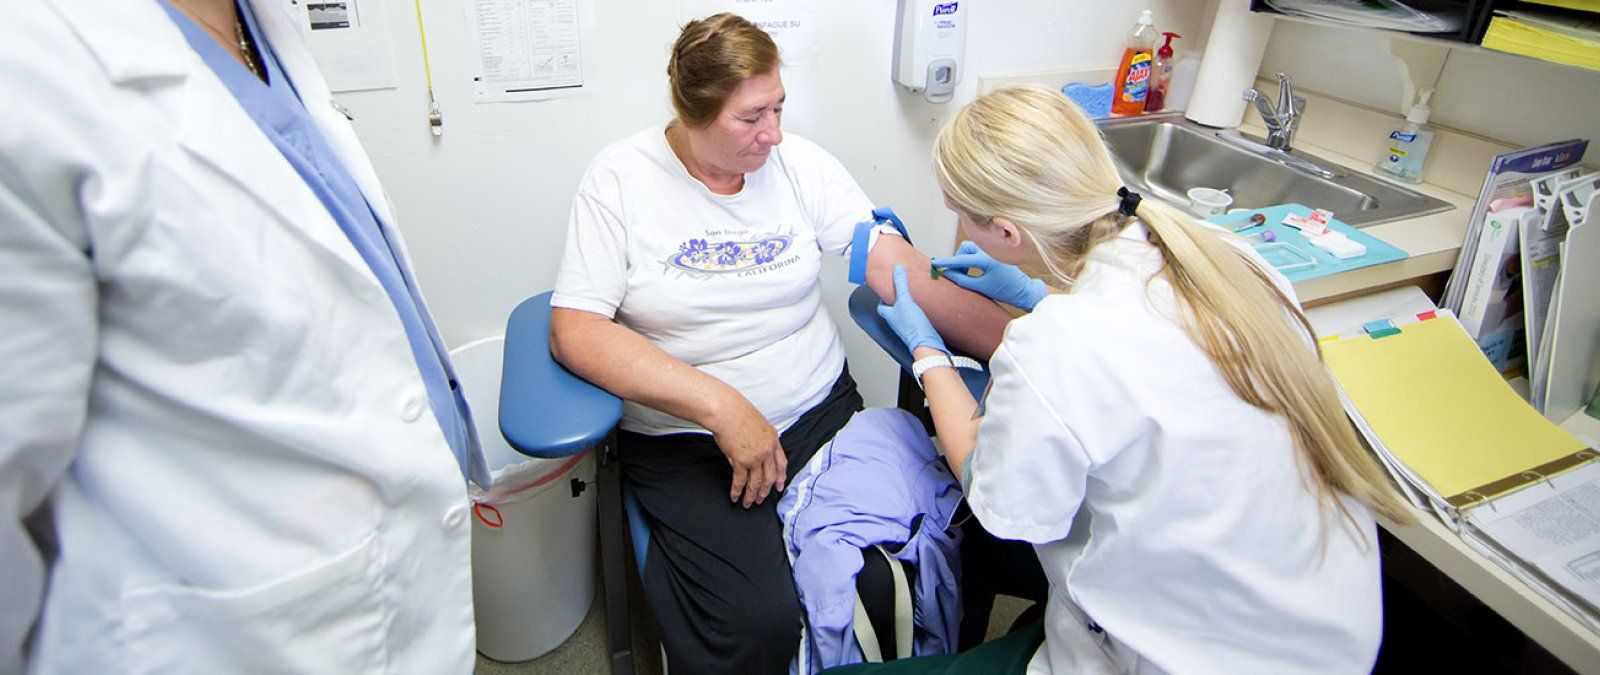 A student nurse leans over an older woman arm as she prepares the woman for a blood draw